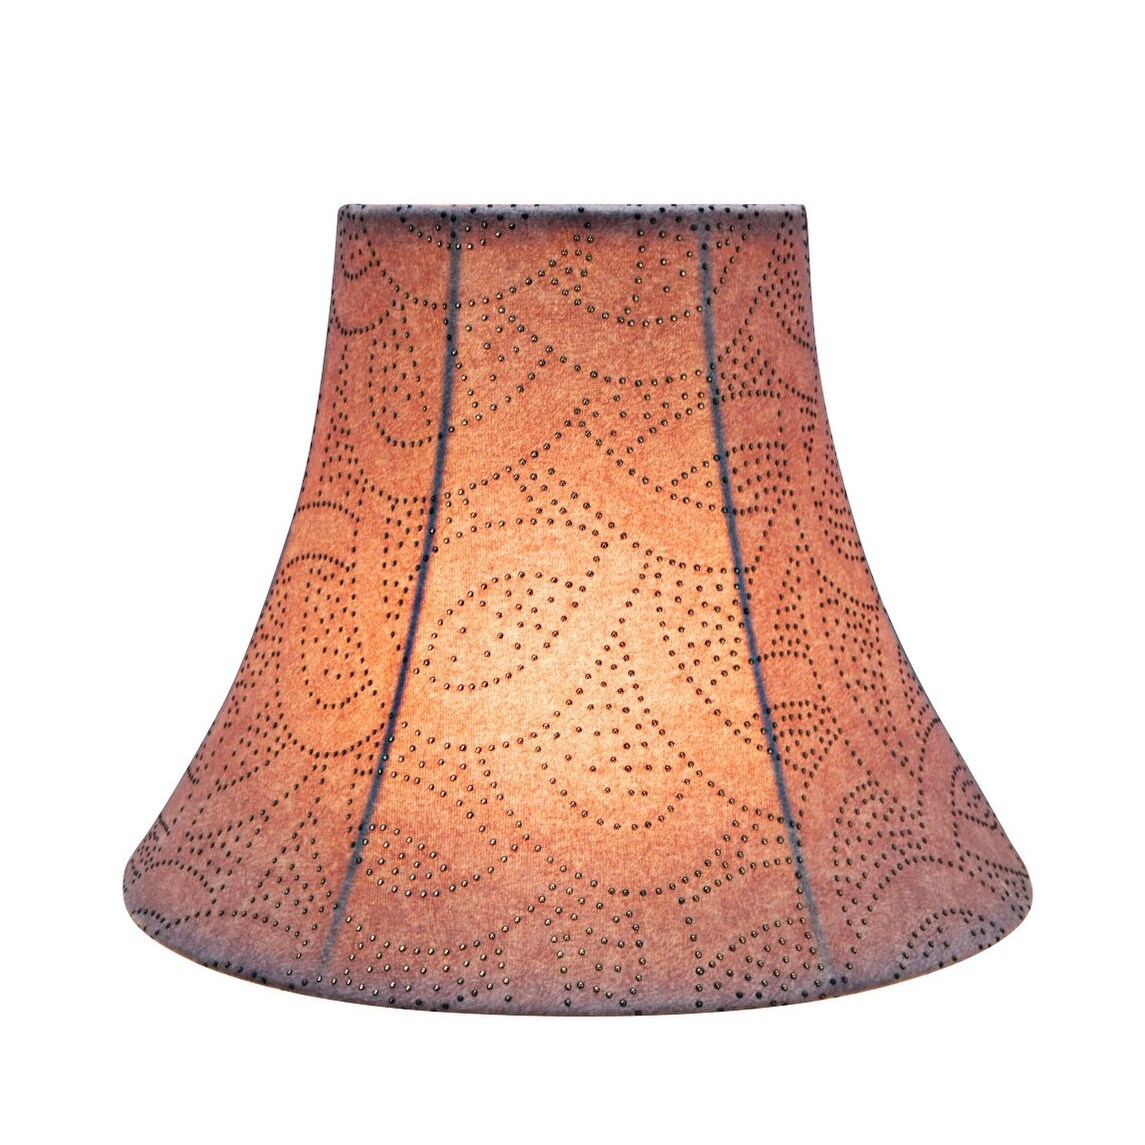 Aspen Creative 30157 Bell Spider Lamp Shade Black & Brown 12" wide 